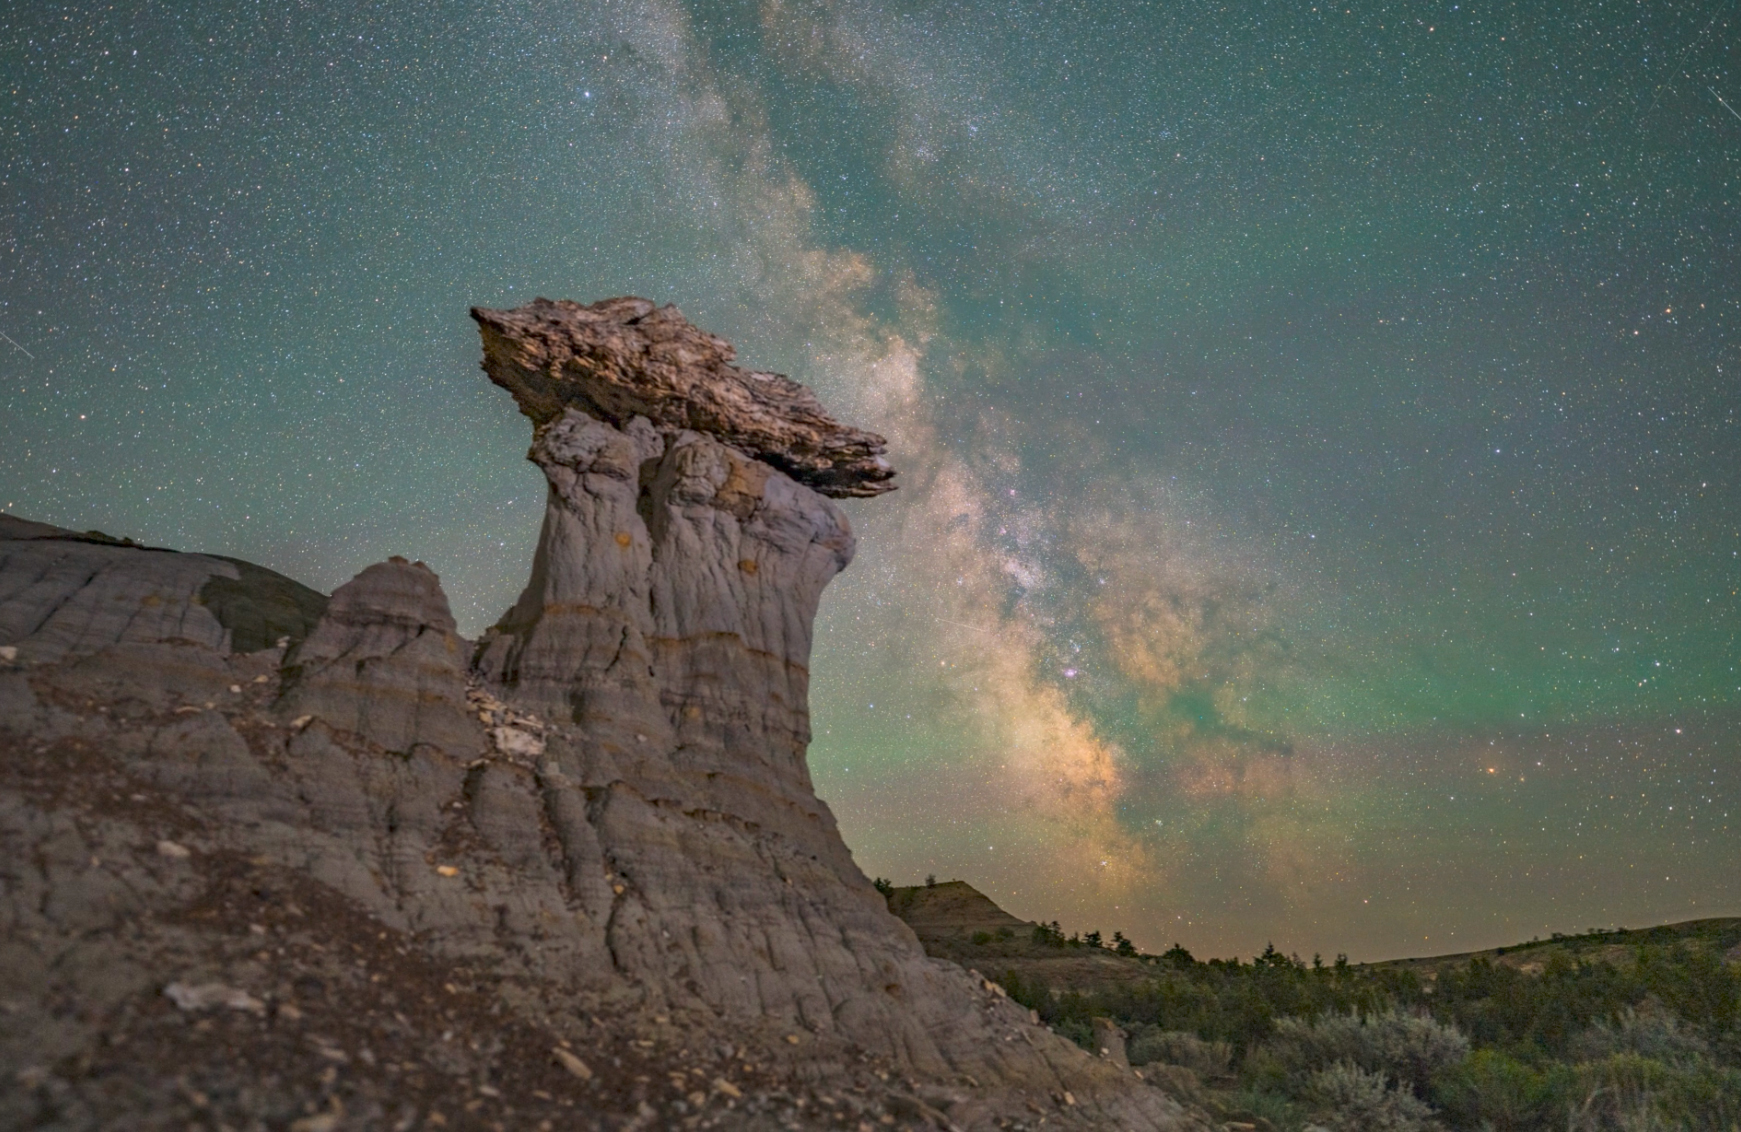 Petrified wood on top of a sandstone pedestal with a starry sky background.